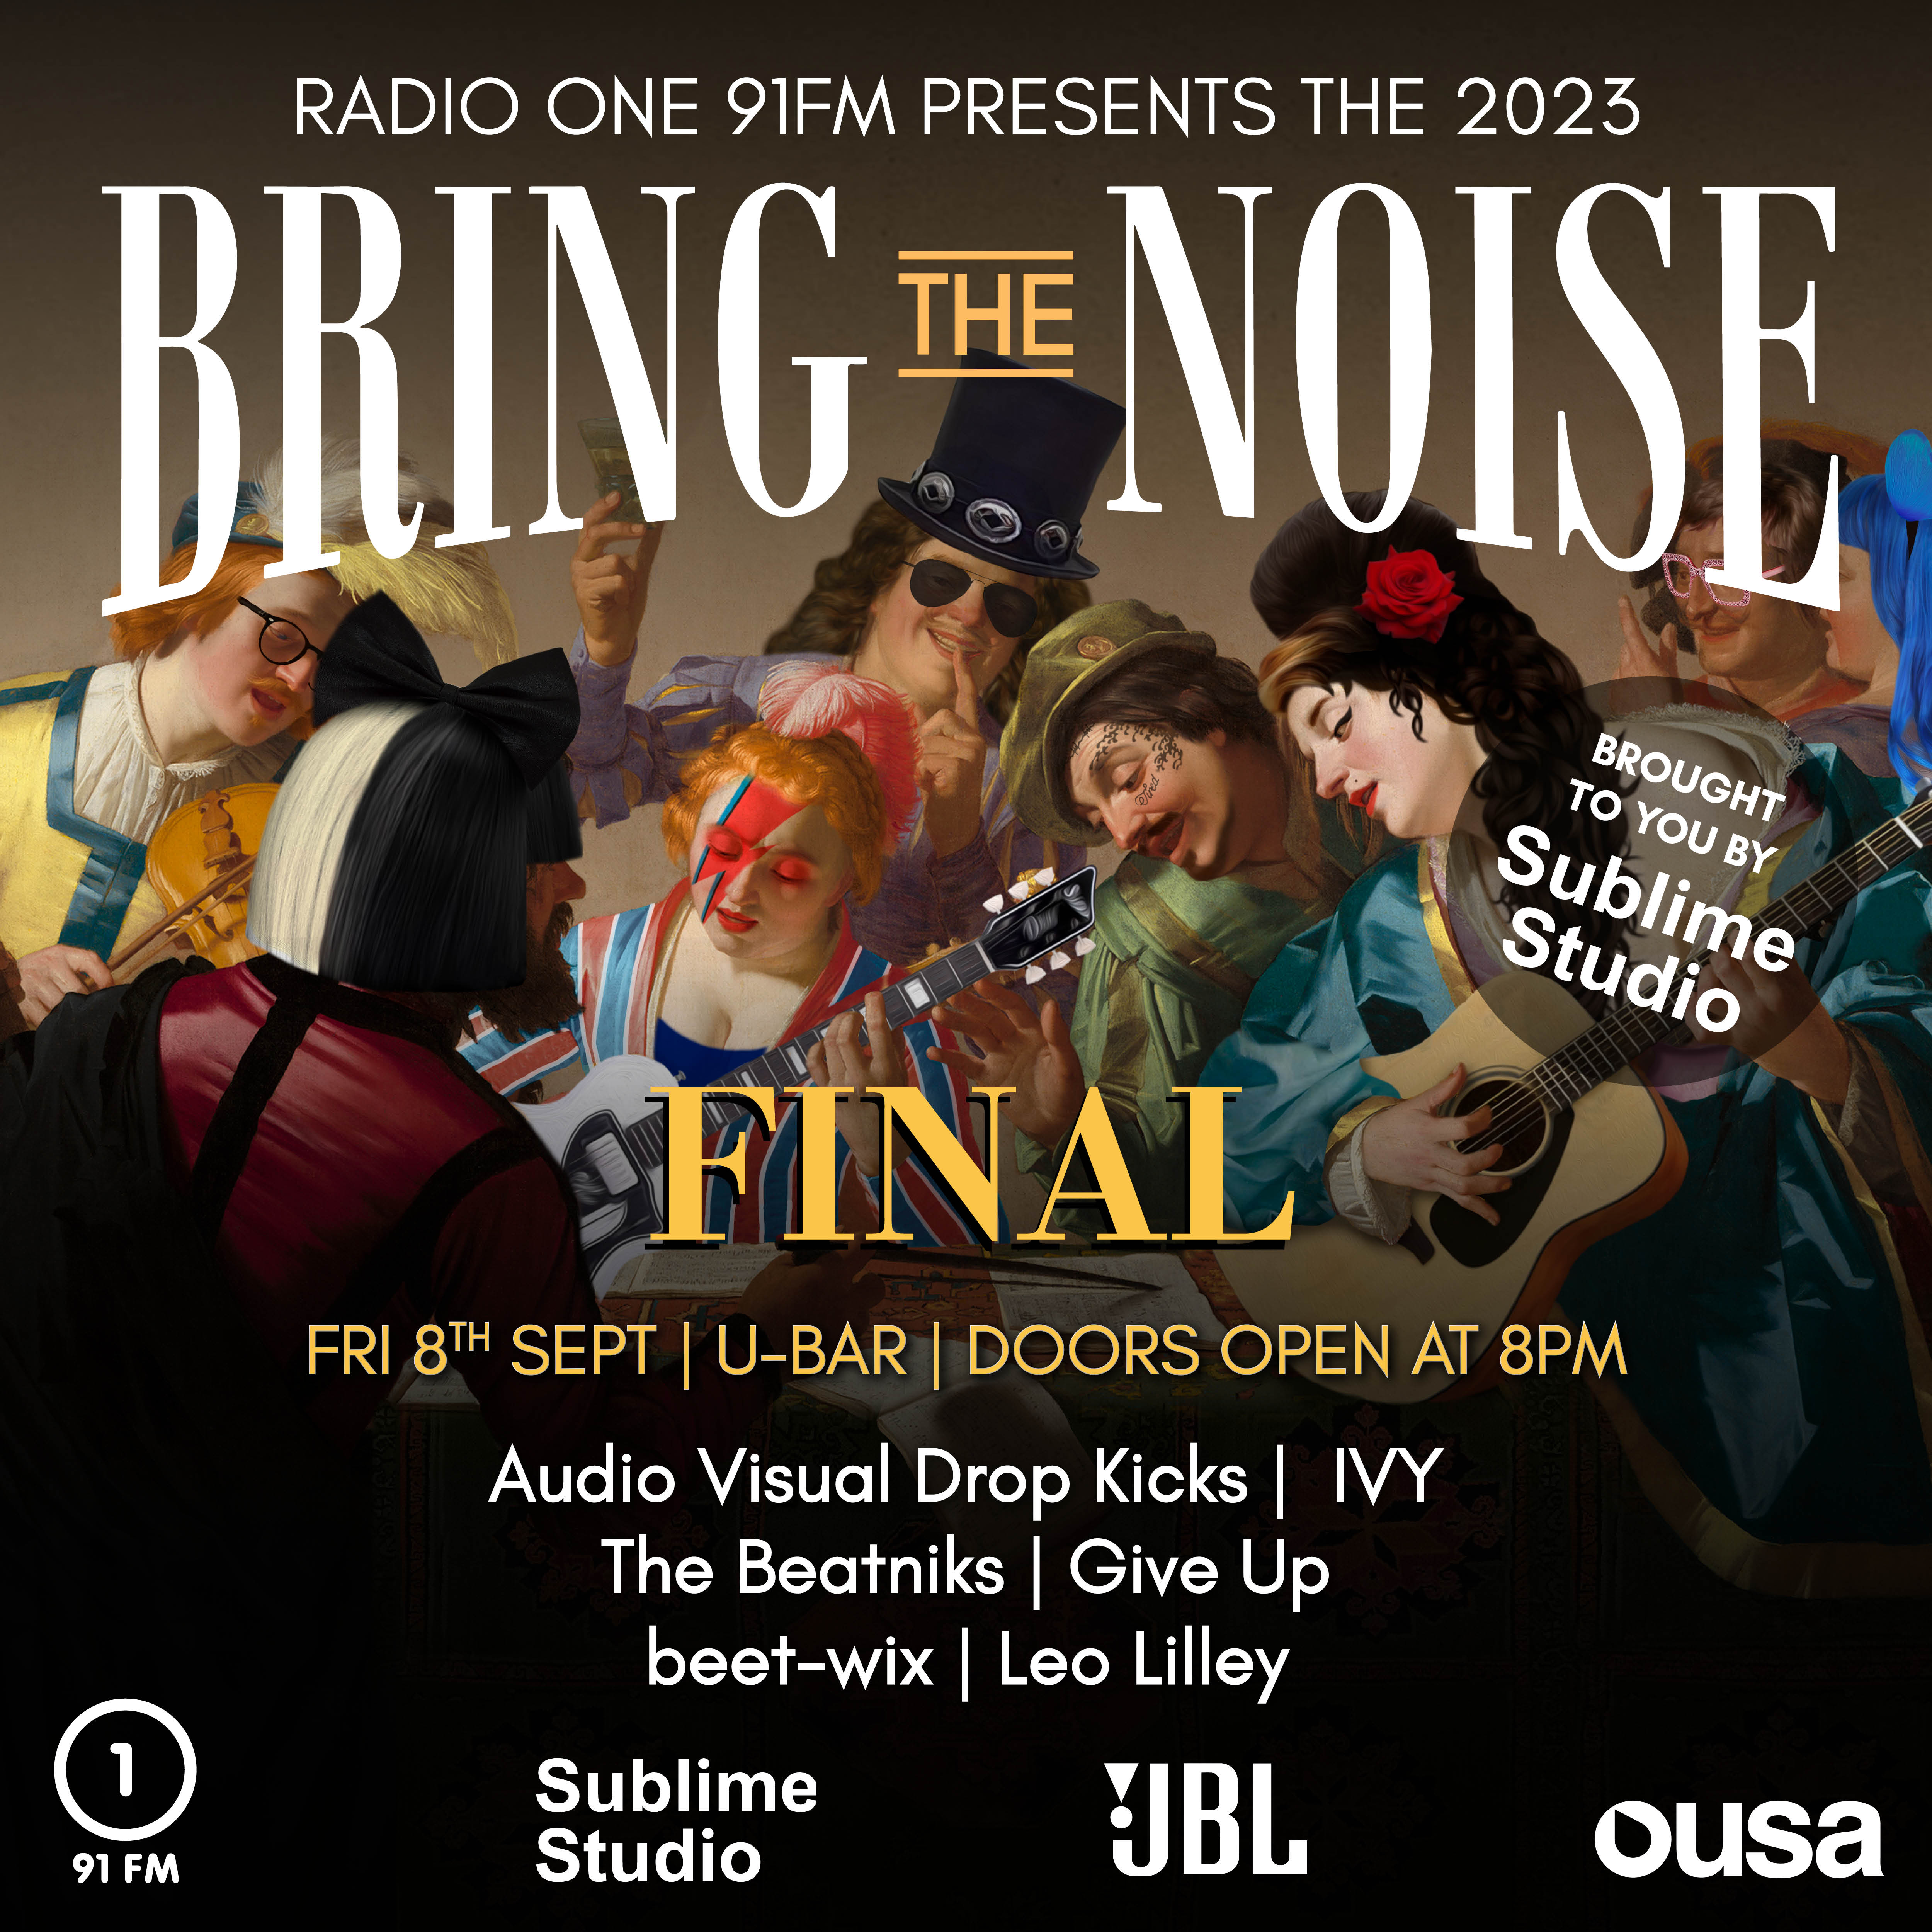 Final - Radio One 91FM Presents: Bring The Noise 2023 - Brought To You By Sublime Studio